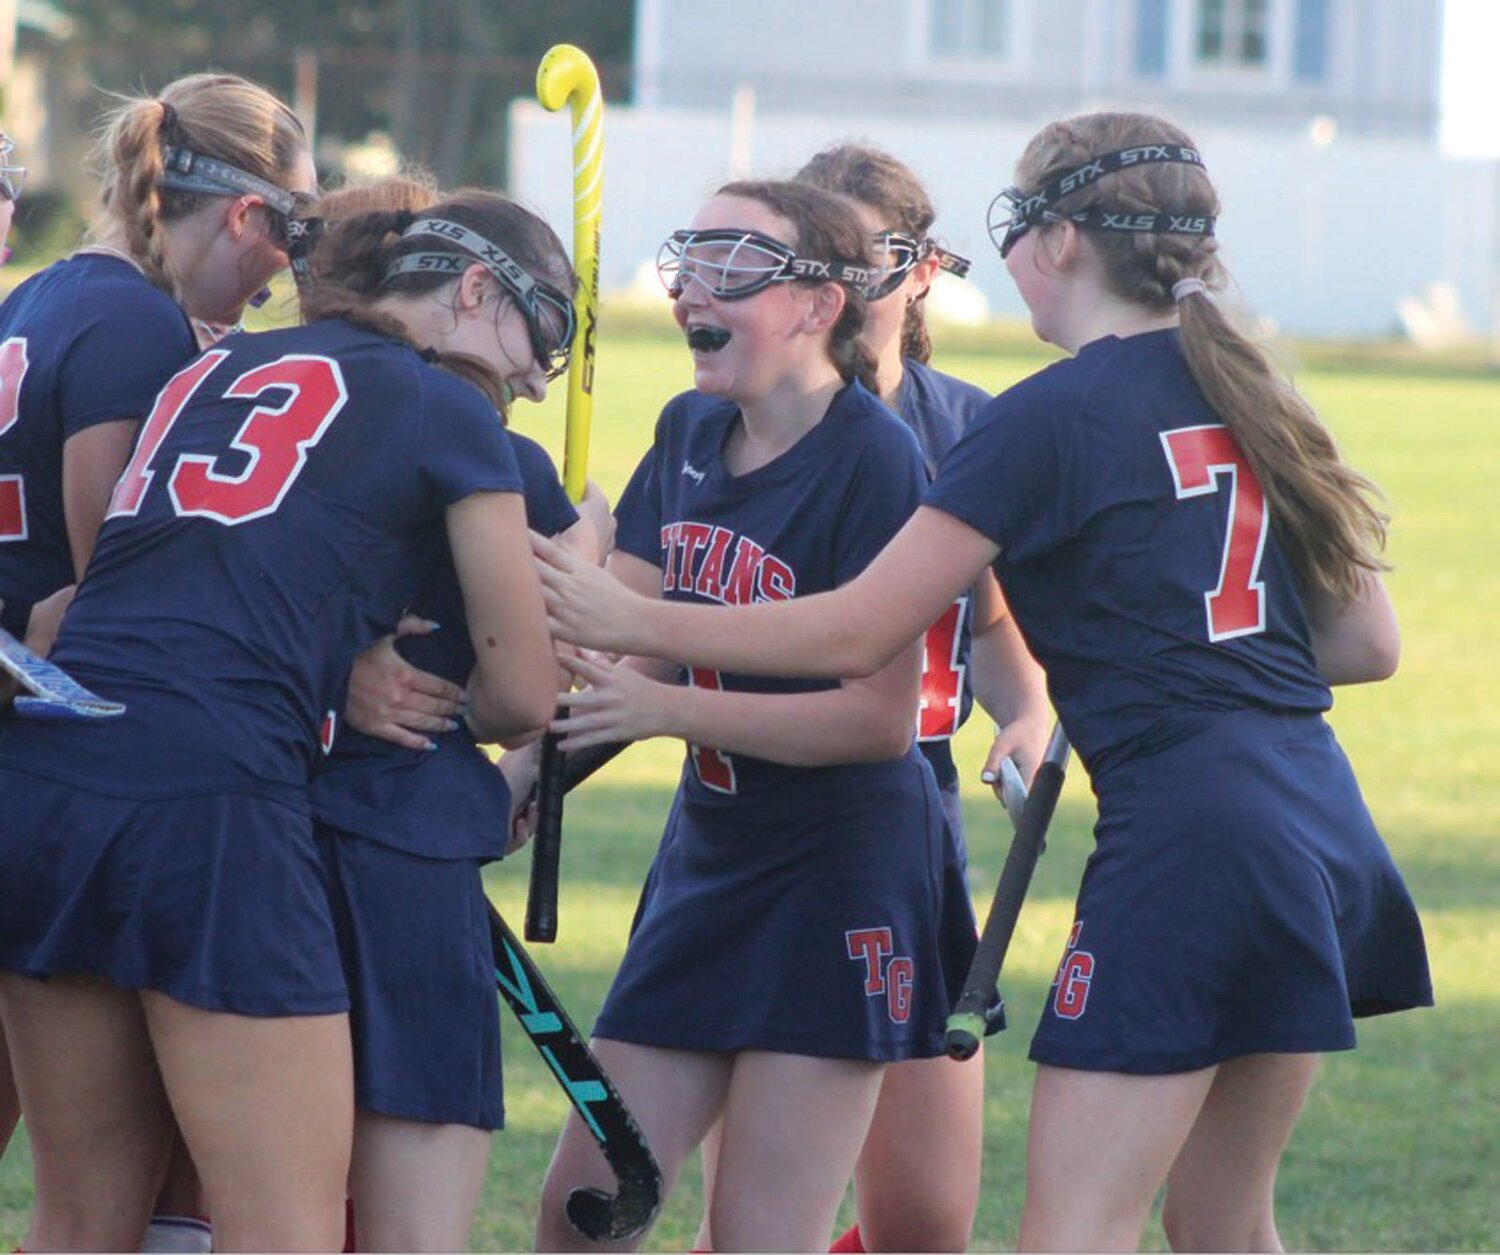 RIVALRY WIN: Members of the Toll Gate field hockey team celebrate after a goal. (Photos by Alex Sponseller)